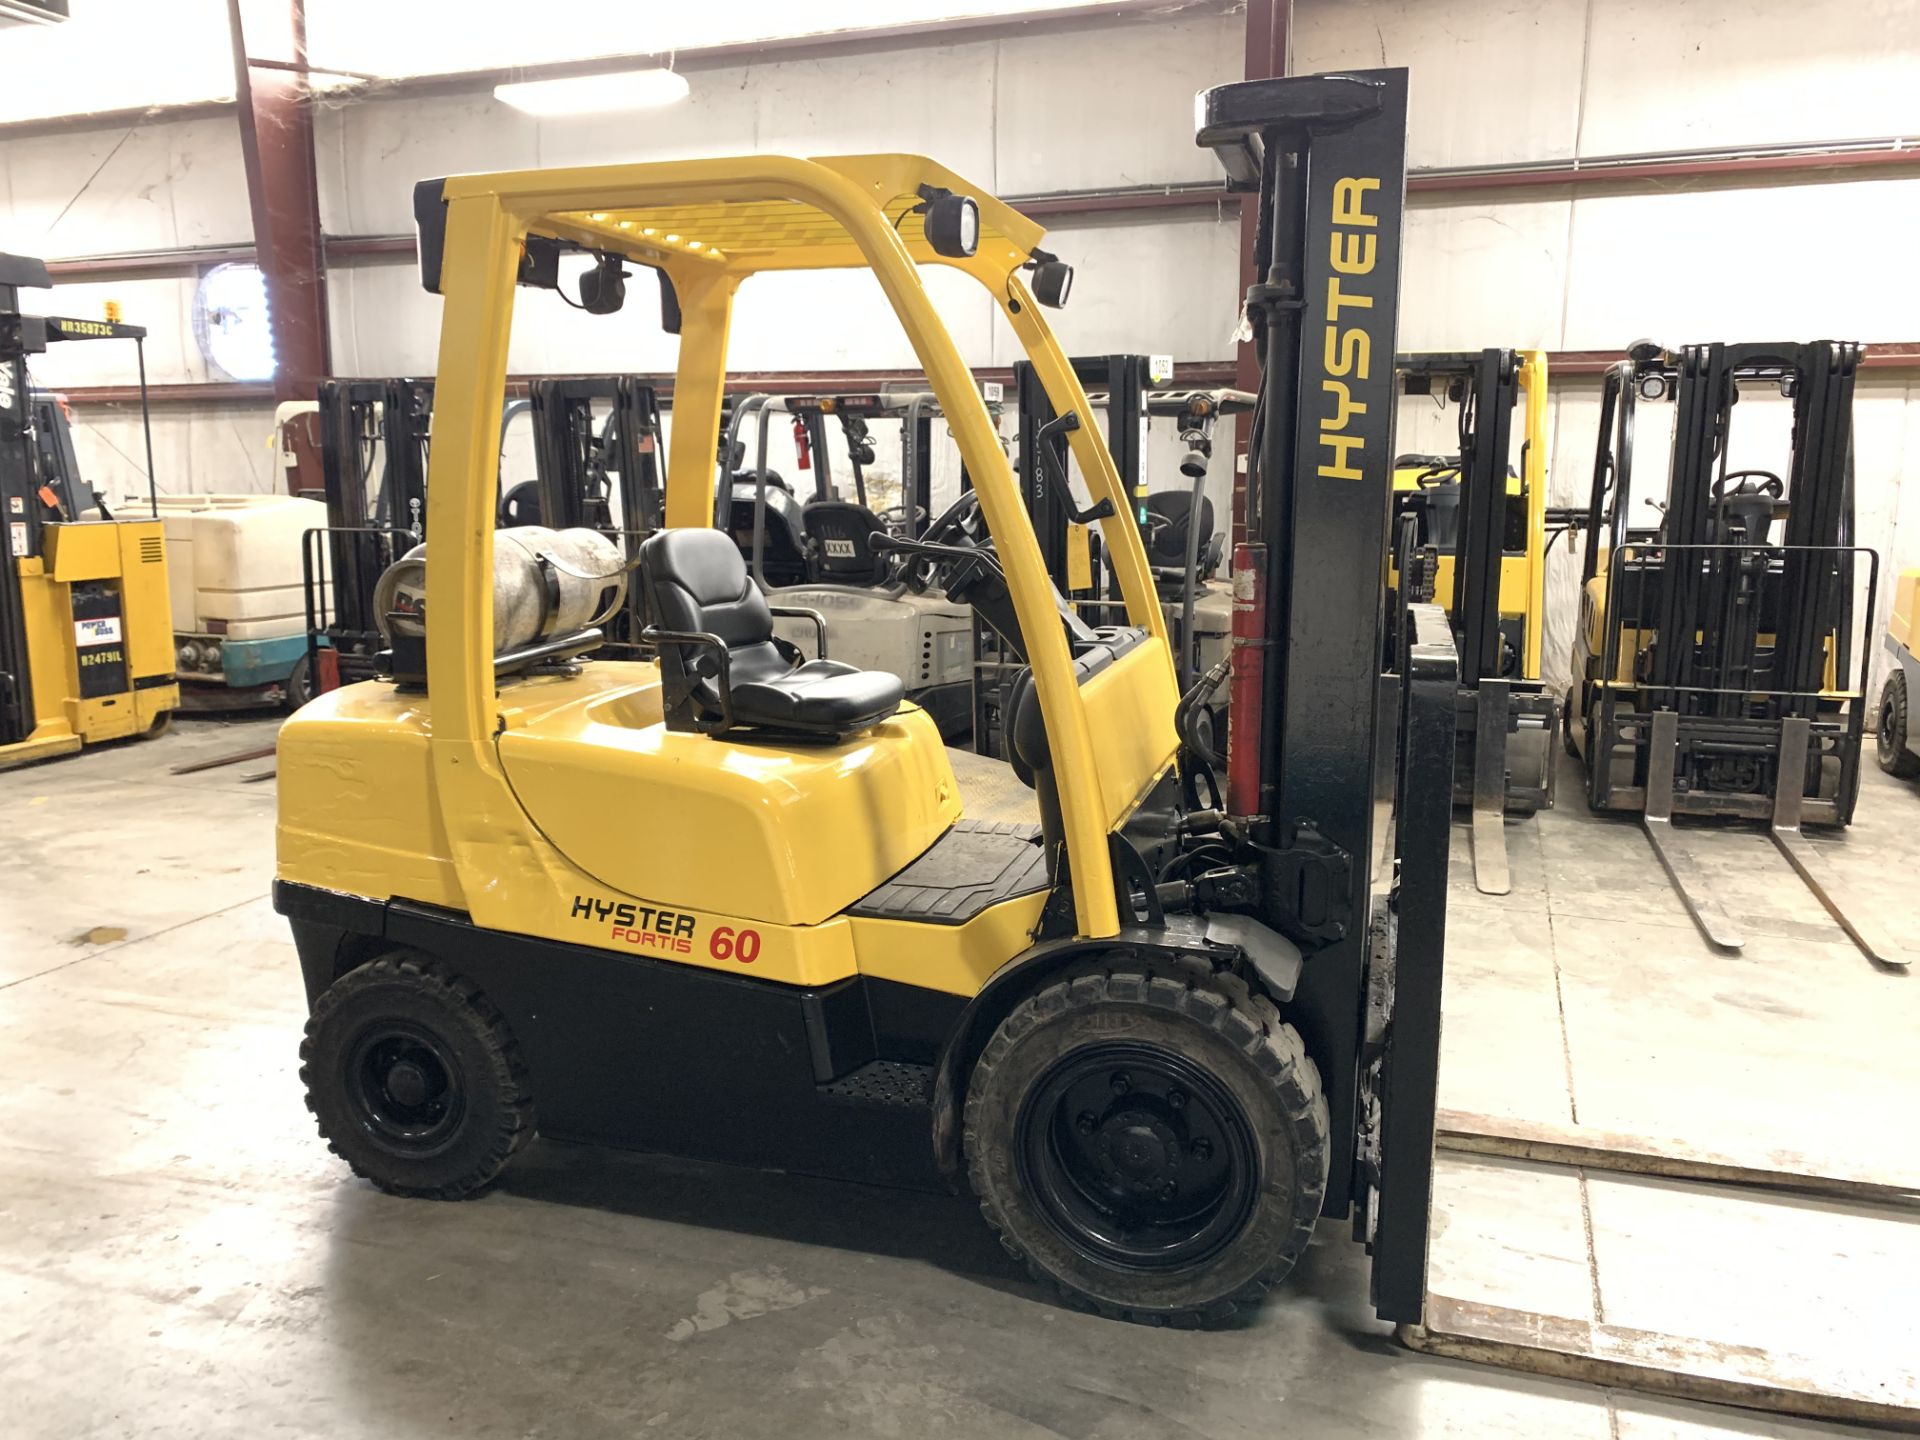 *LOCATED OHIO* 2007 HYSTER 6,000-LB CAP FORKLIFT, MOD: H60FT, LP, PNEUMATIC TIRE, 3-STAGE, SIDESHIFT - Image 5 of 10